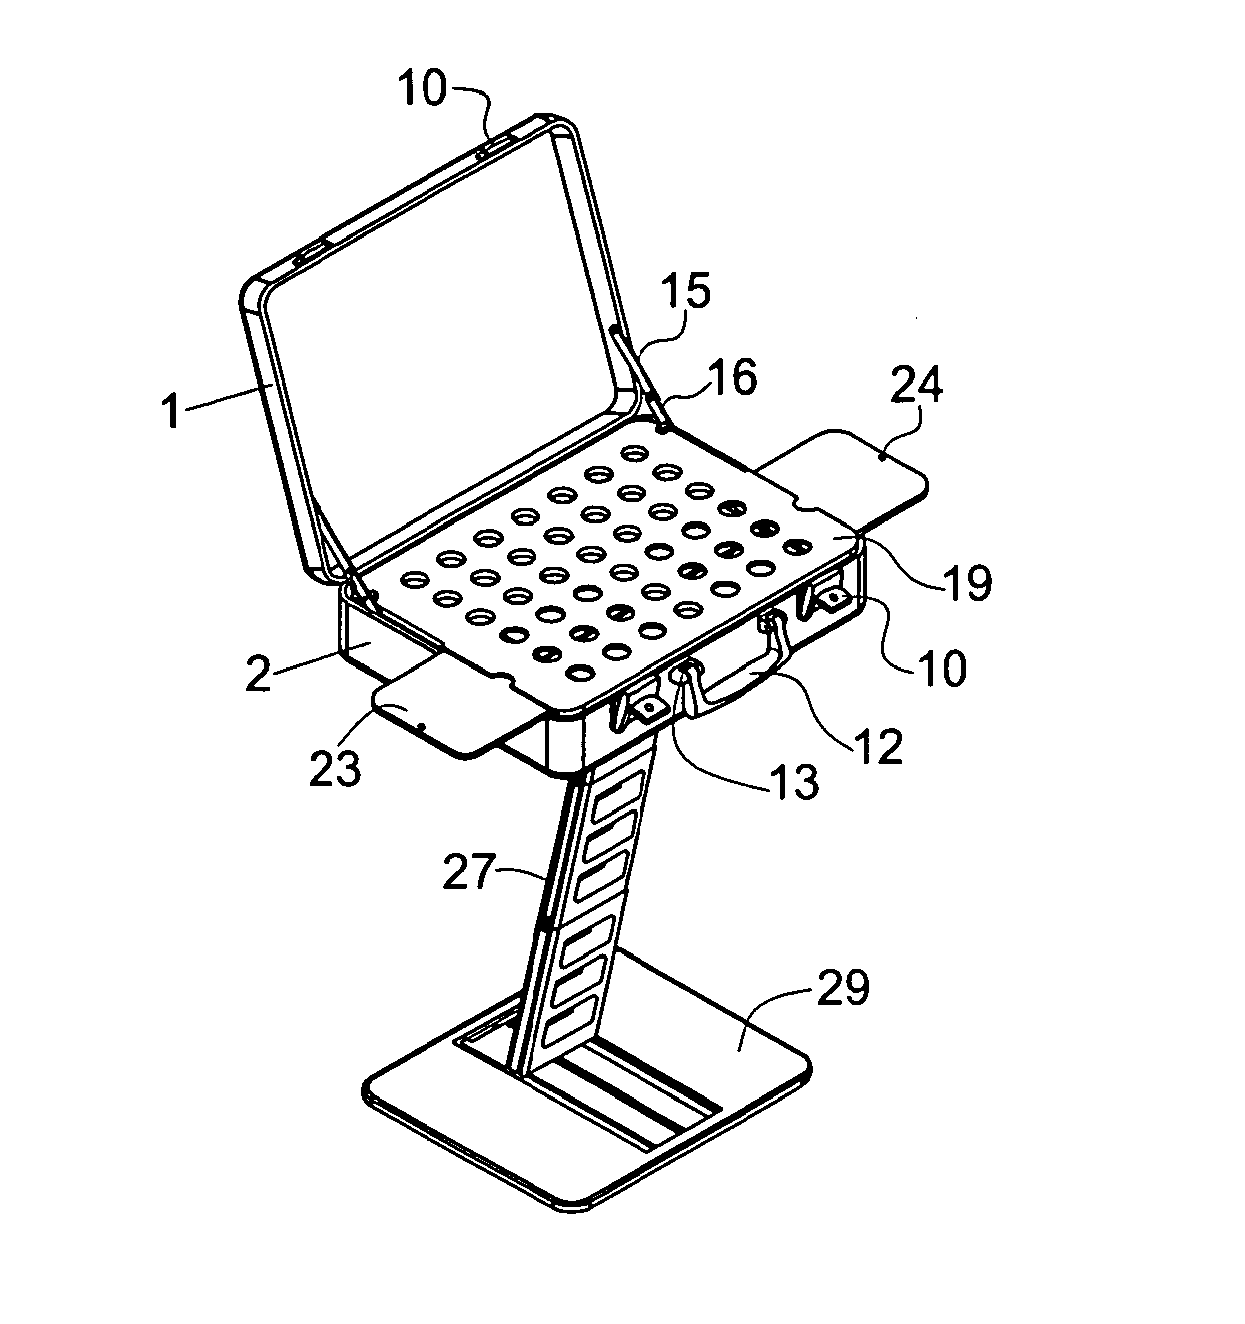 Combined laptop case and laptop stand